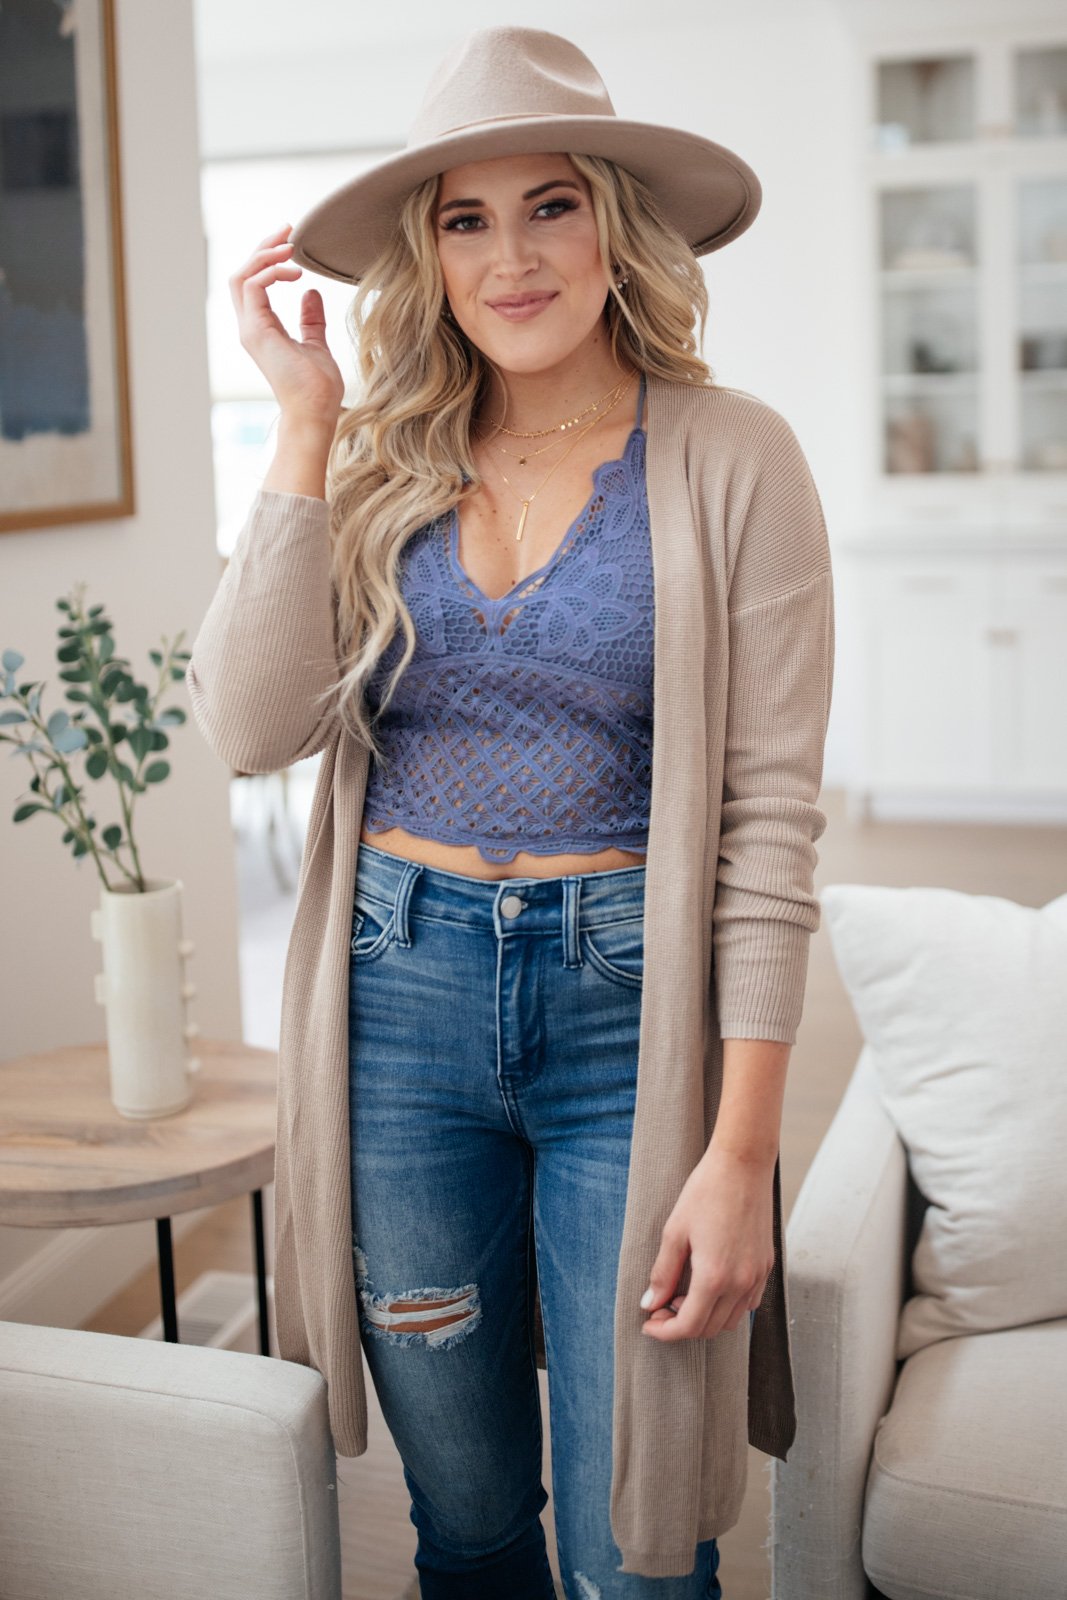 Wild And Free Crop Top in Dusty Blue (Online Exclusive)